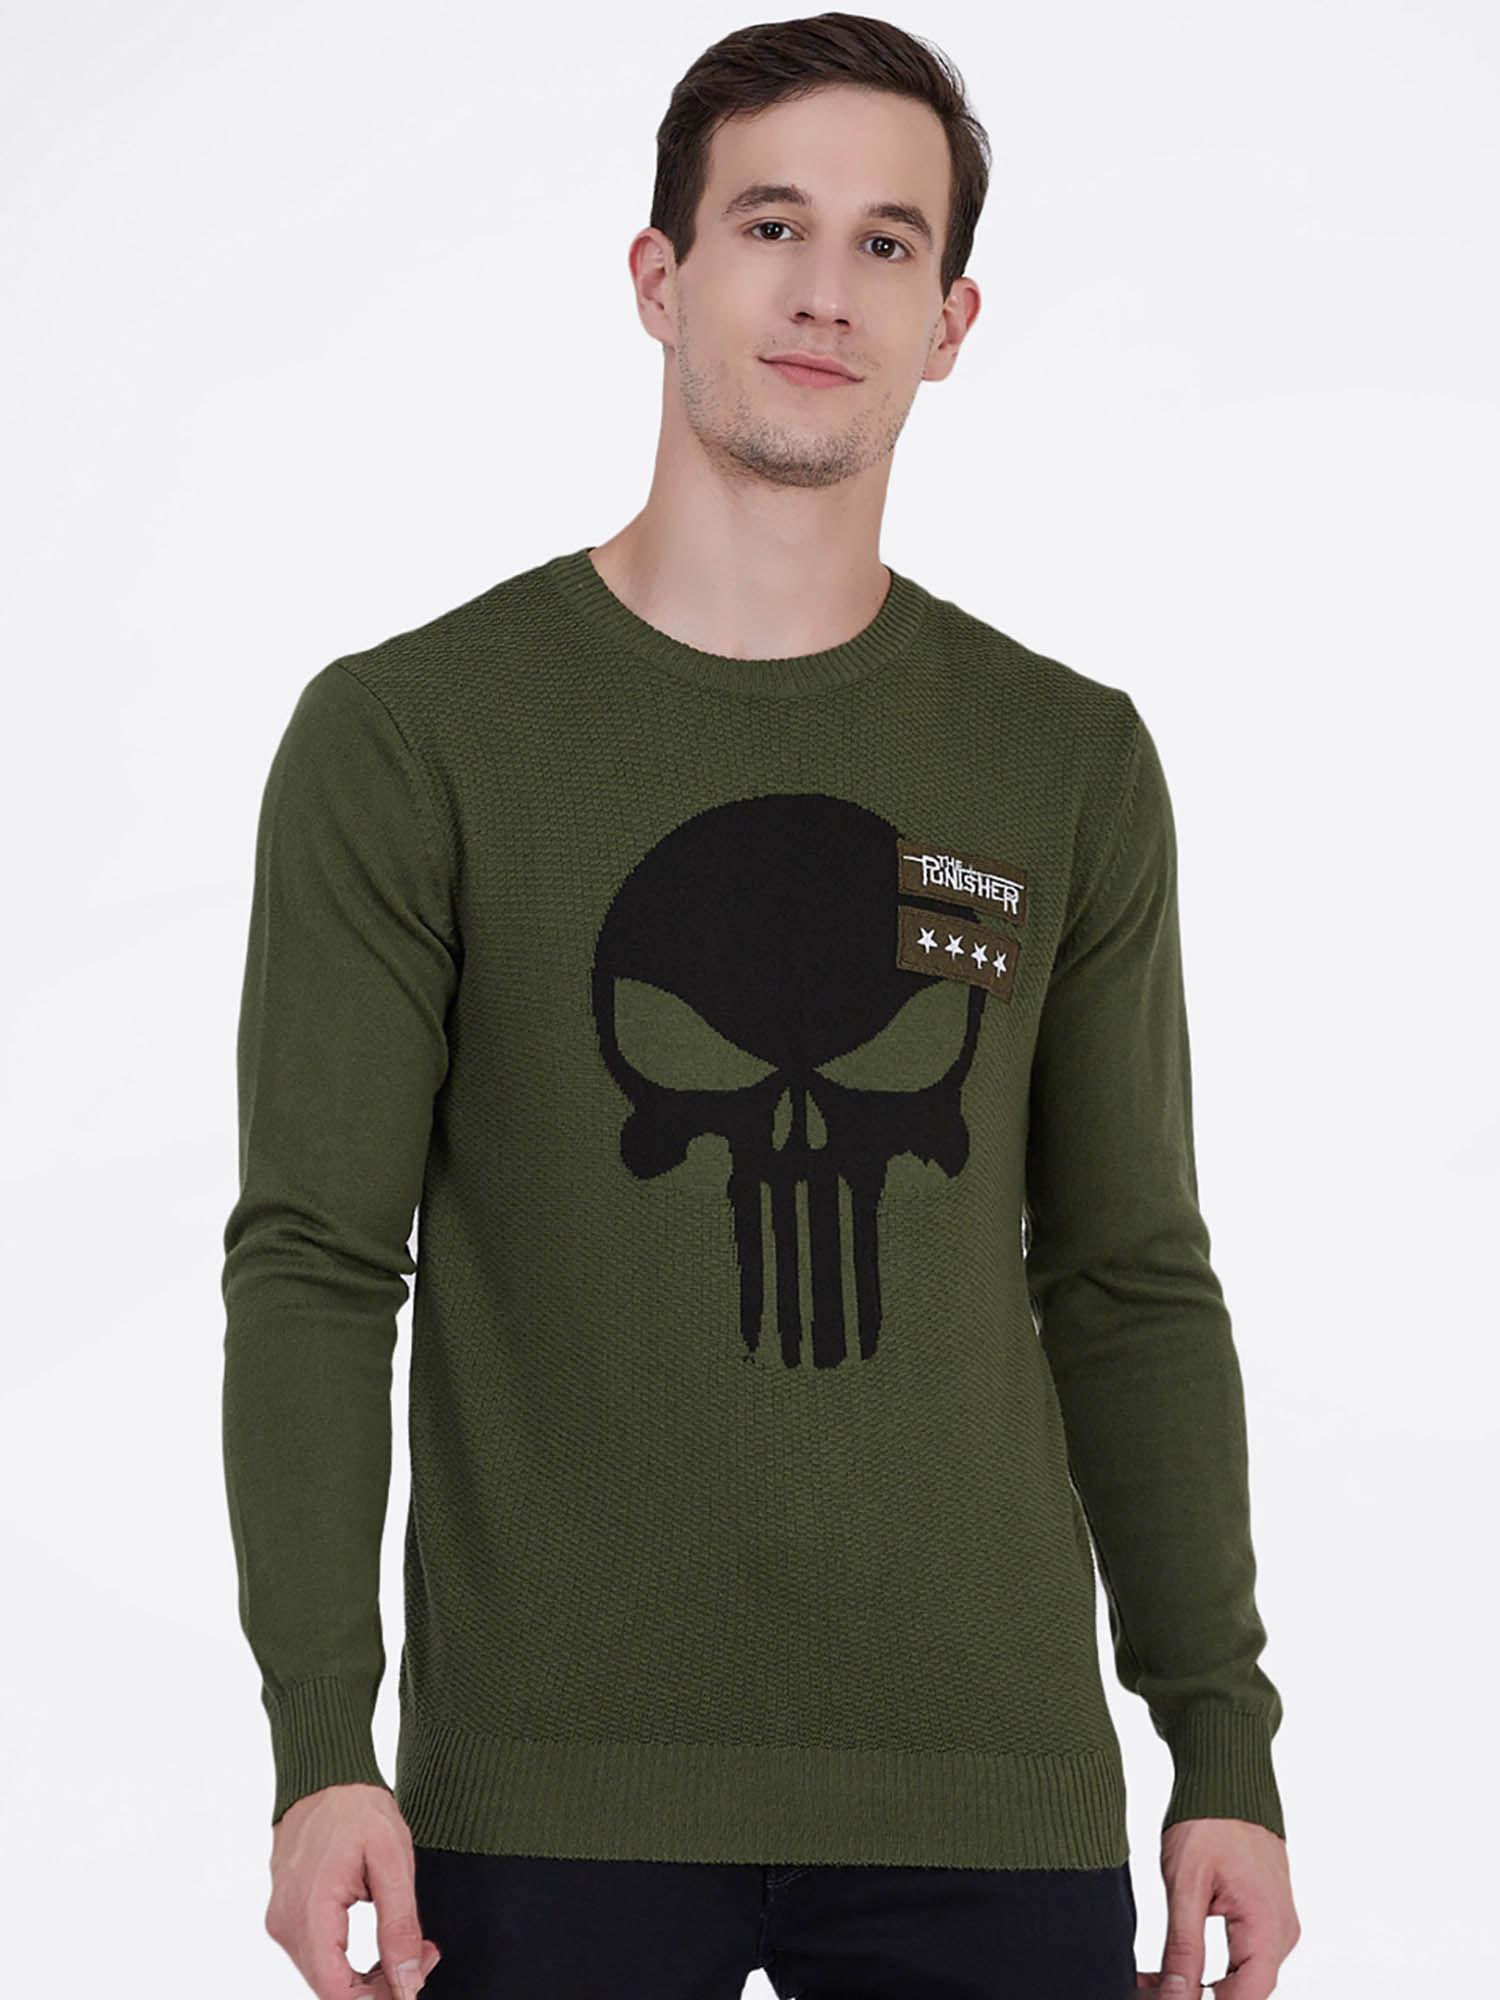 punisher-printed-sweater-for-young-men